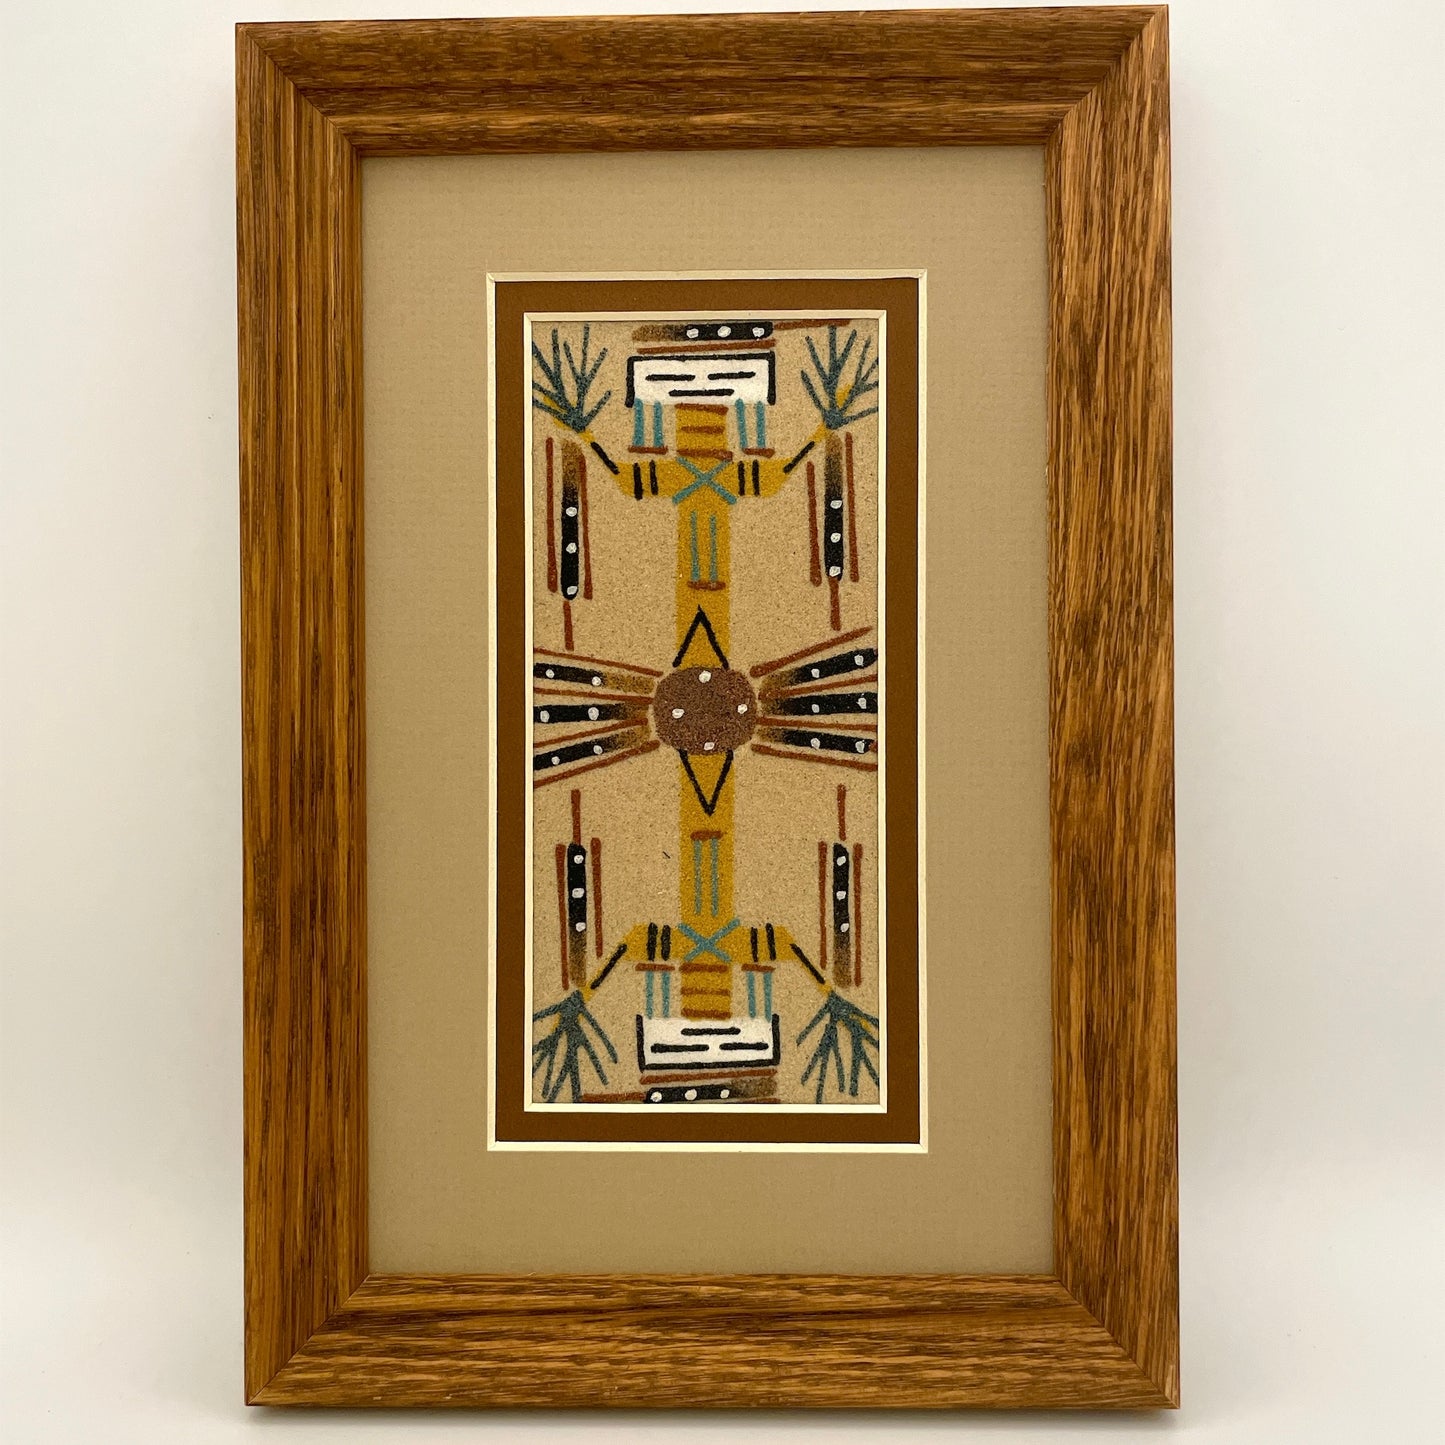 Navajo Sand Painting By Tracy Bryant 9" x 6"